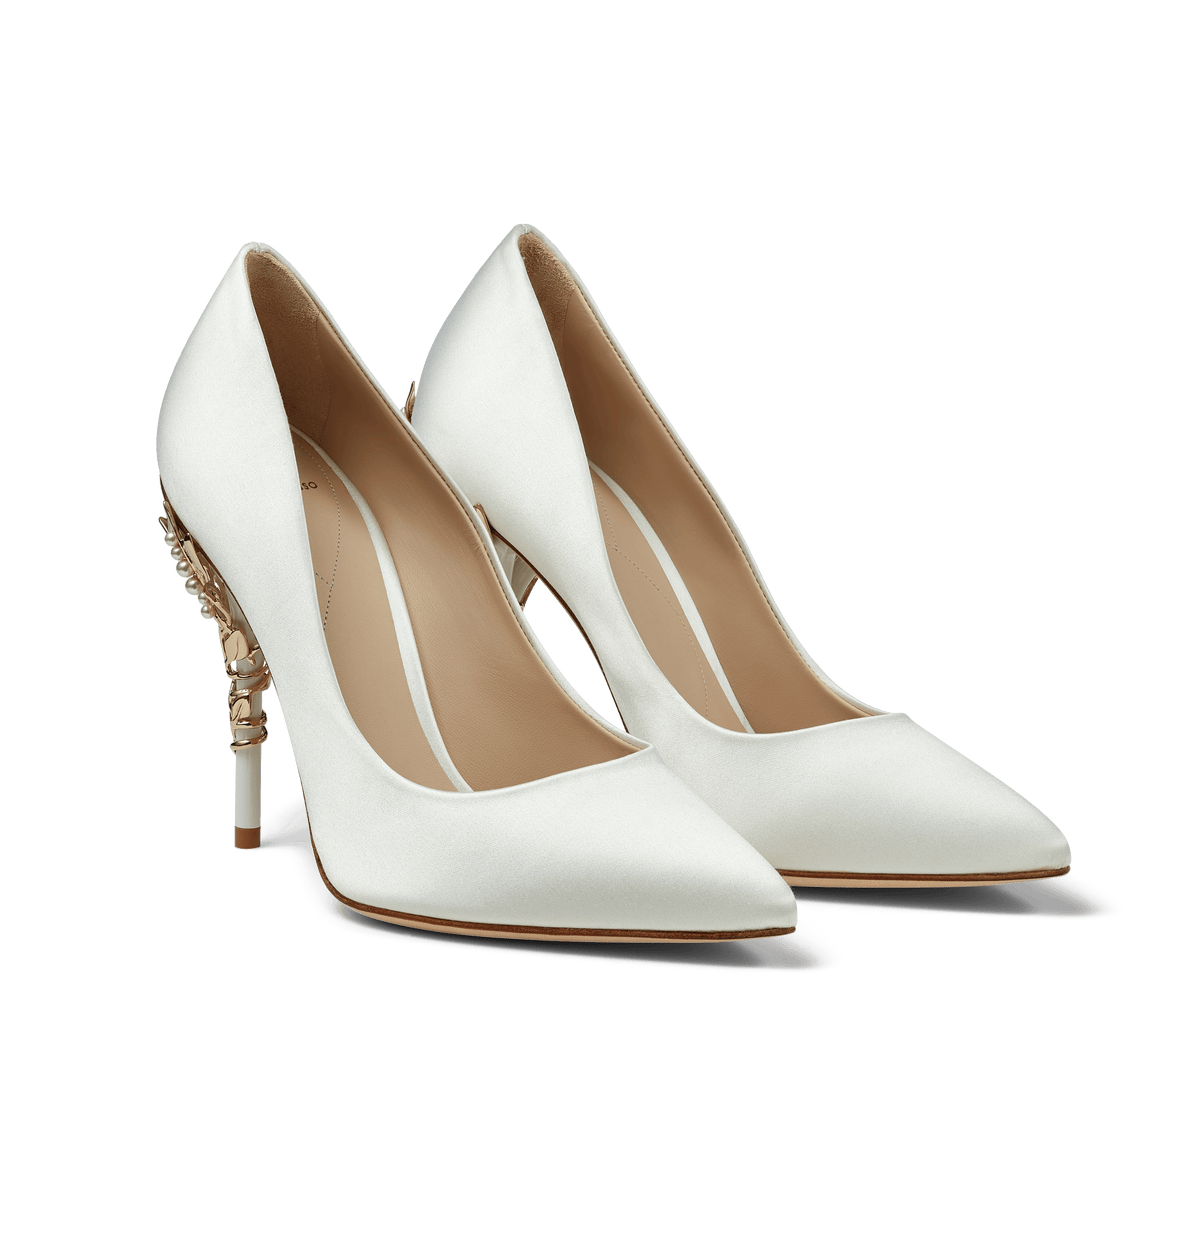 White Satin Eden Heels with Pearls and Gold Leaves